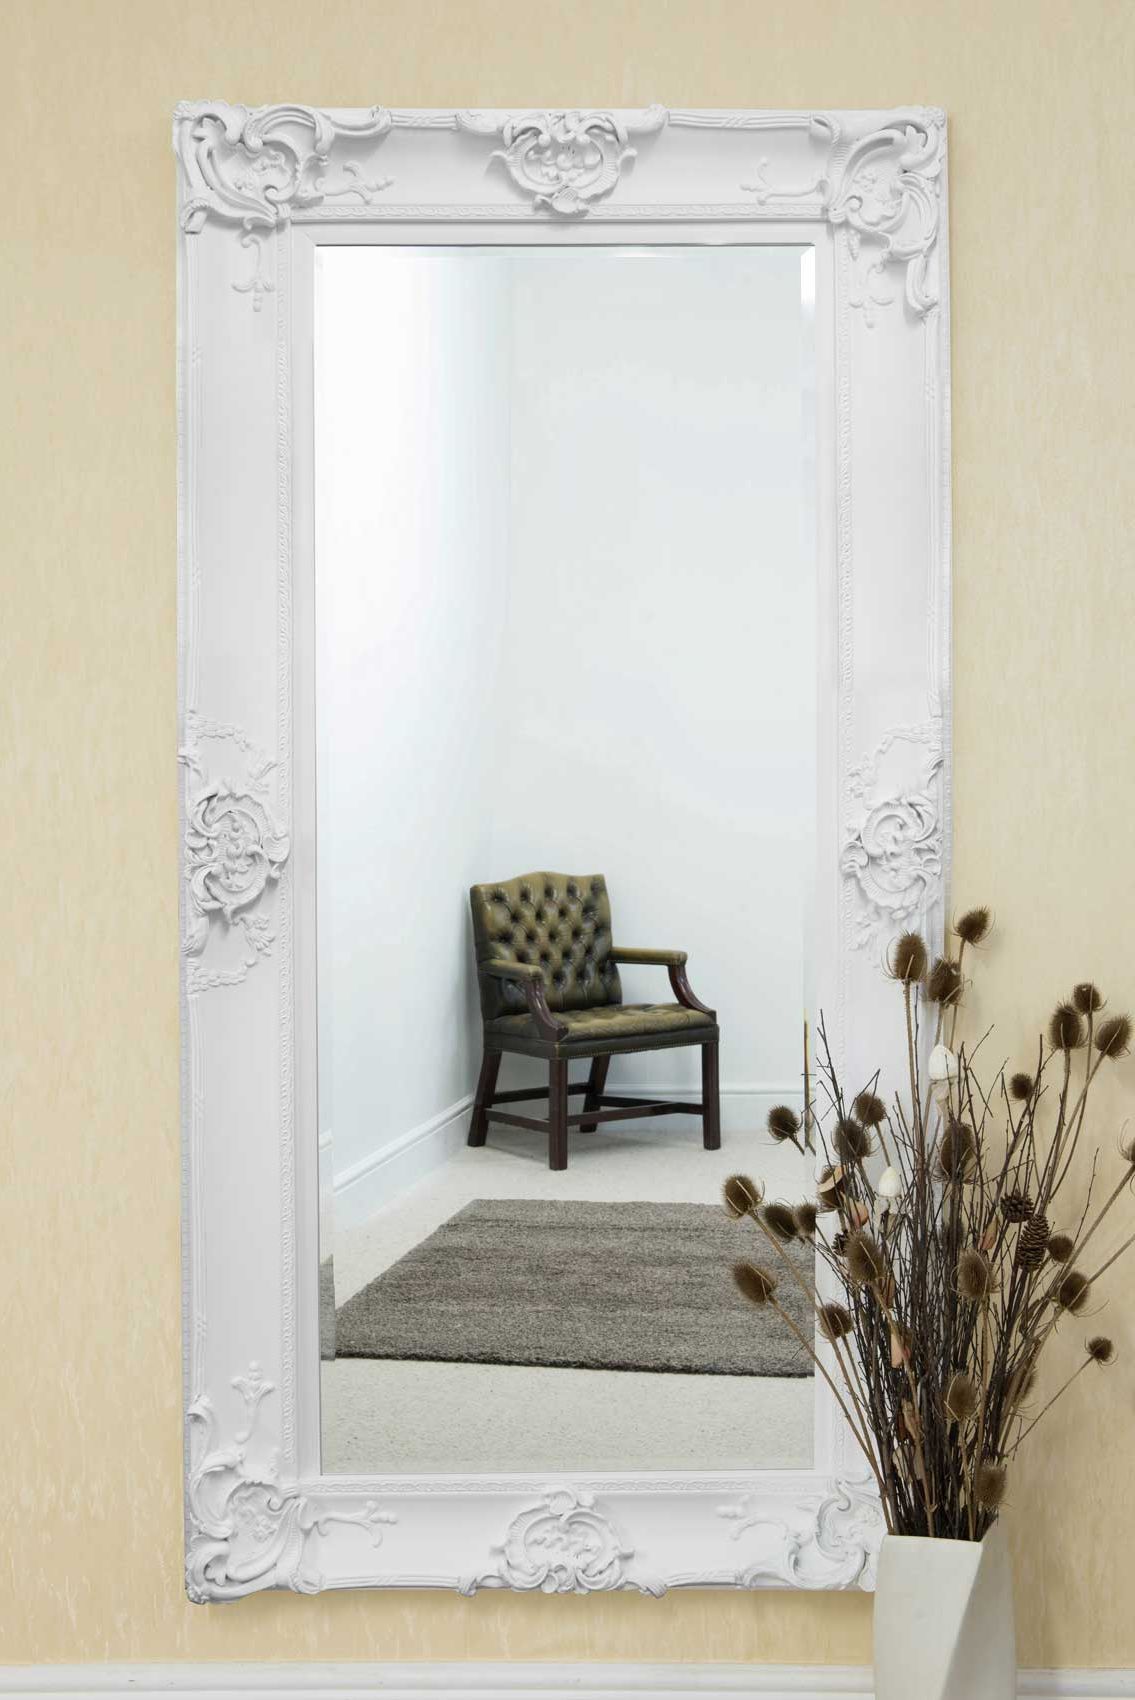 Beautiful Large White Decorative Ornate Wall Mirror 6ft X 3ft 183 X Intended For Recent White Wall Mirrors (View 6 of 15)